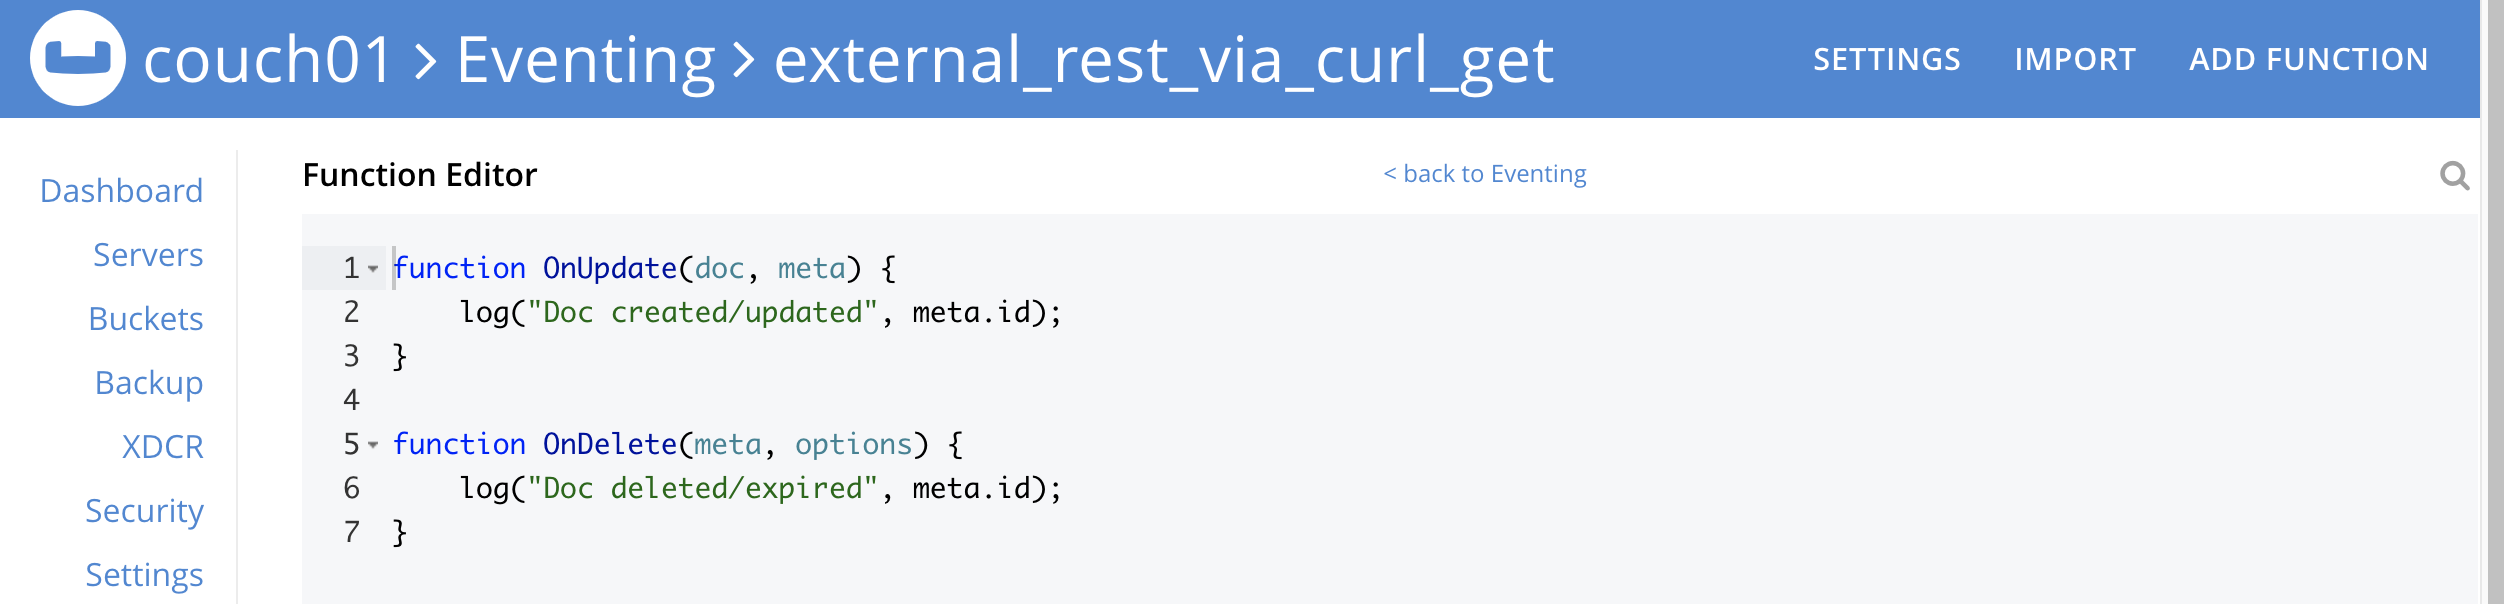 ext rest via curl 02 editor with default